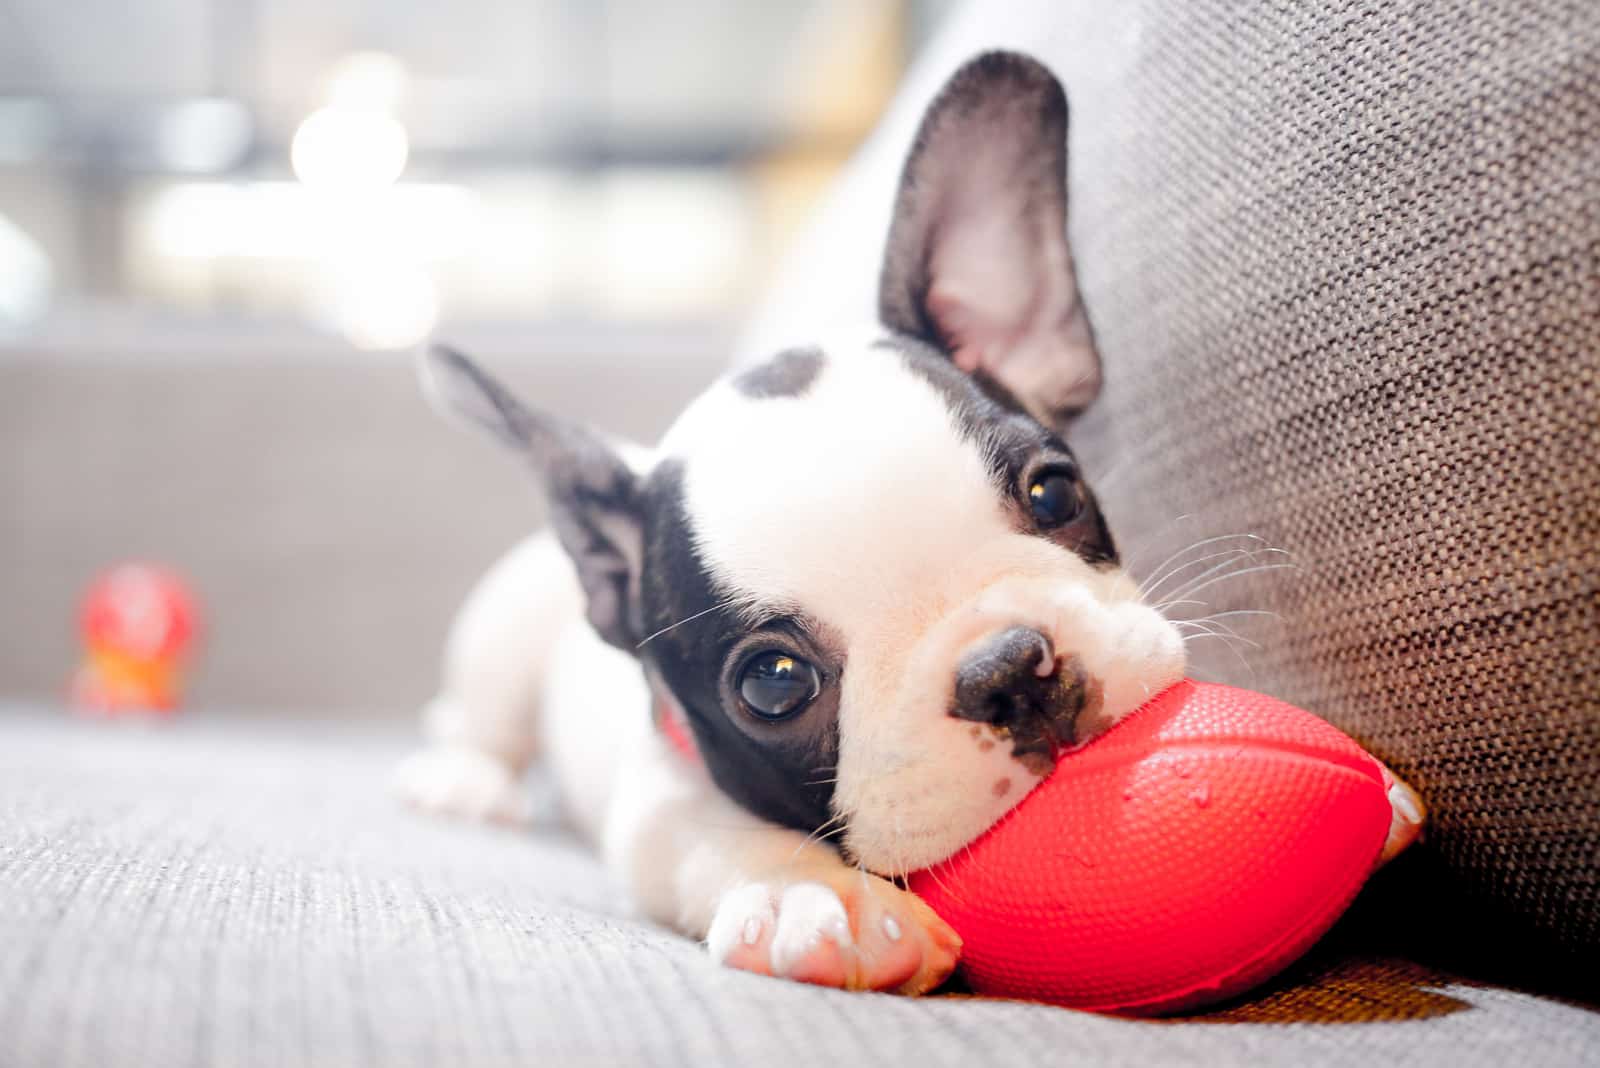 a french bulldog puppy on a couch nibbles a ball